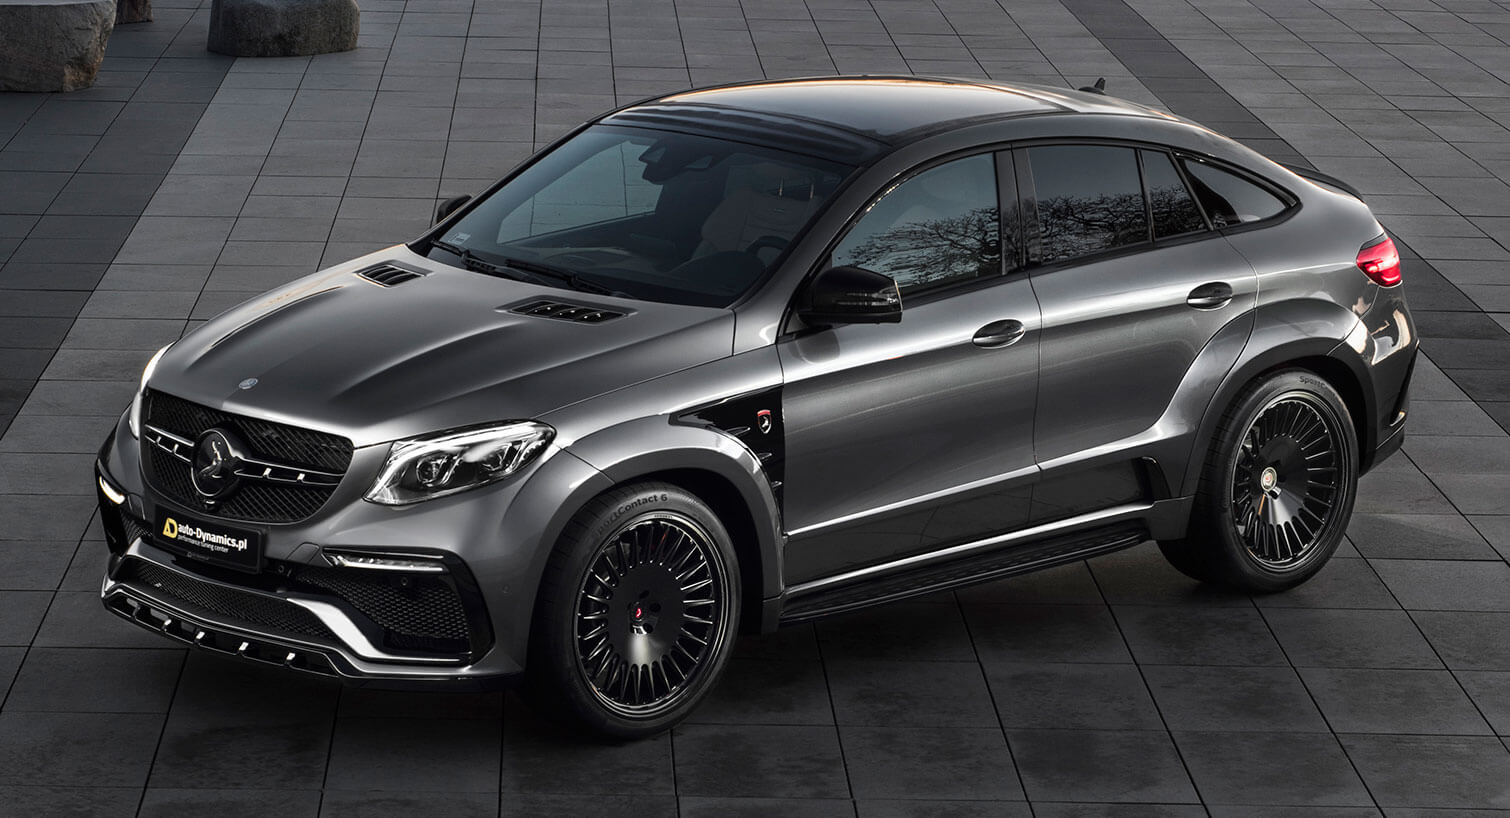 Mercedes Amg Gle 63 S Coupe Pumped To 795 Hp Hits 62 Mph In 3 25 Sec Carscoops